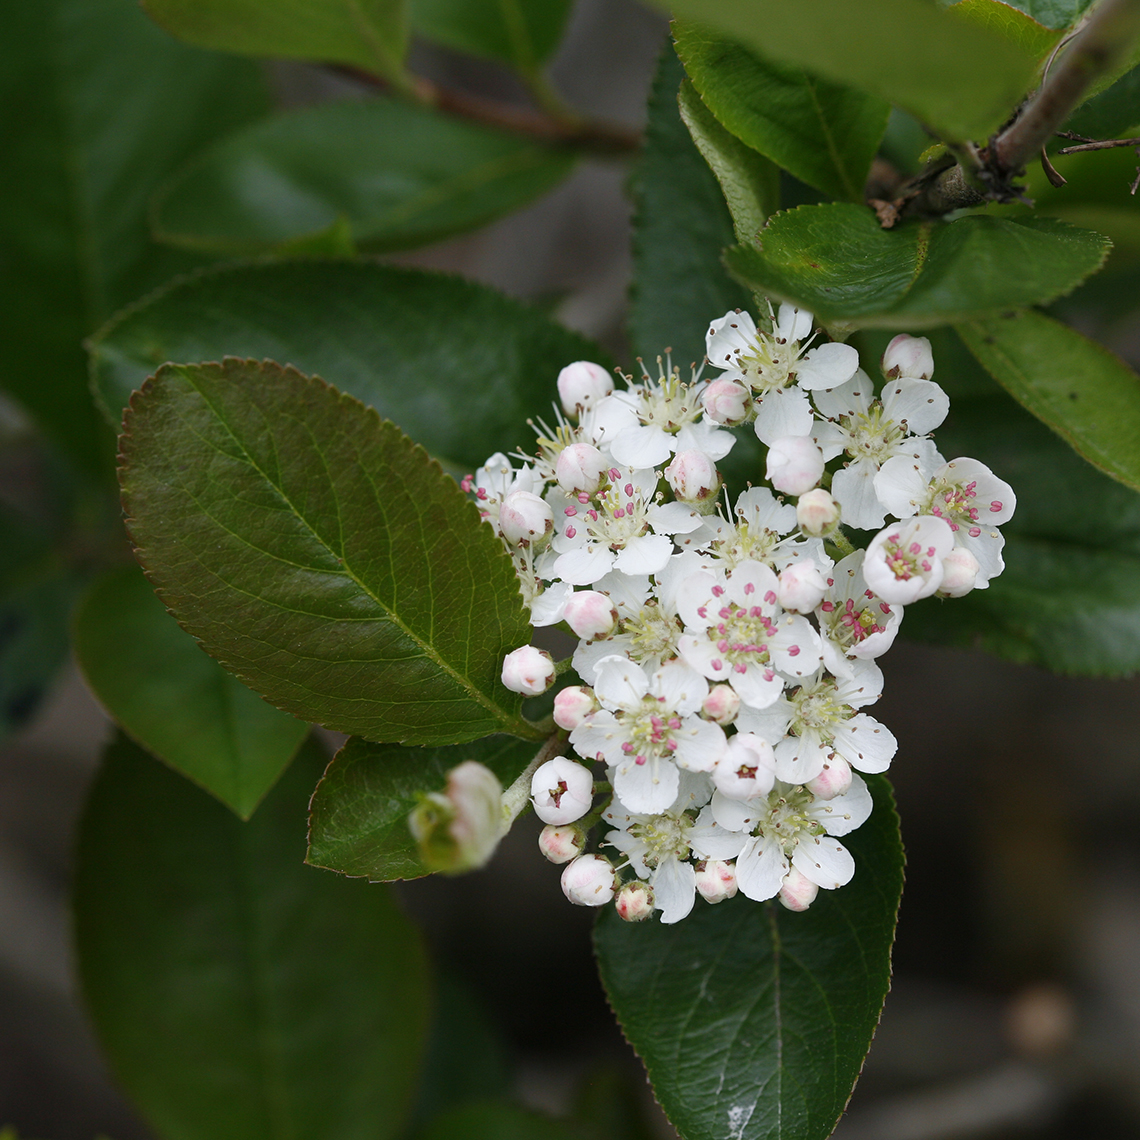 Close up of white Aronia Viking flowers speckled with pink